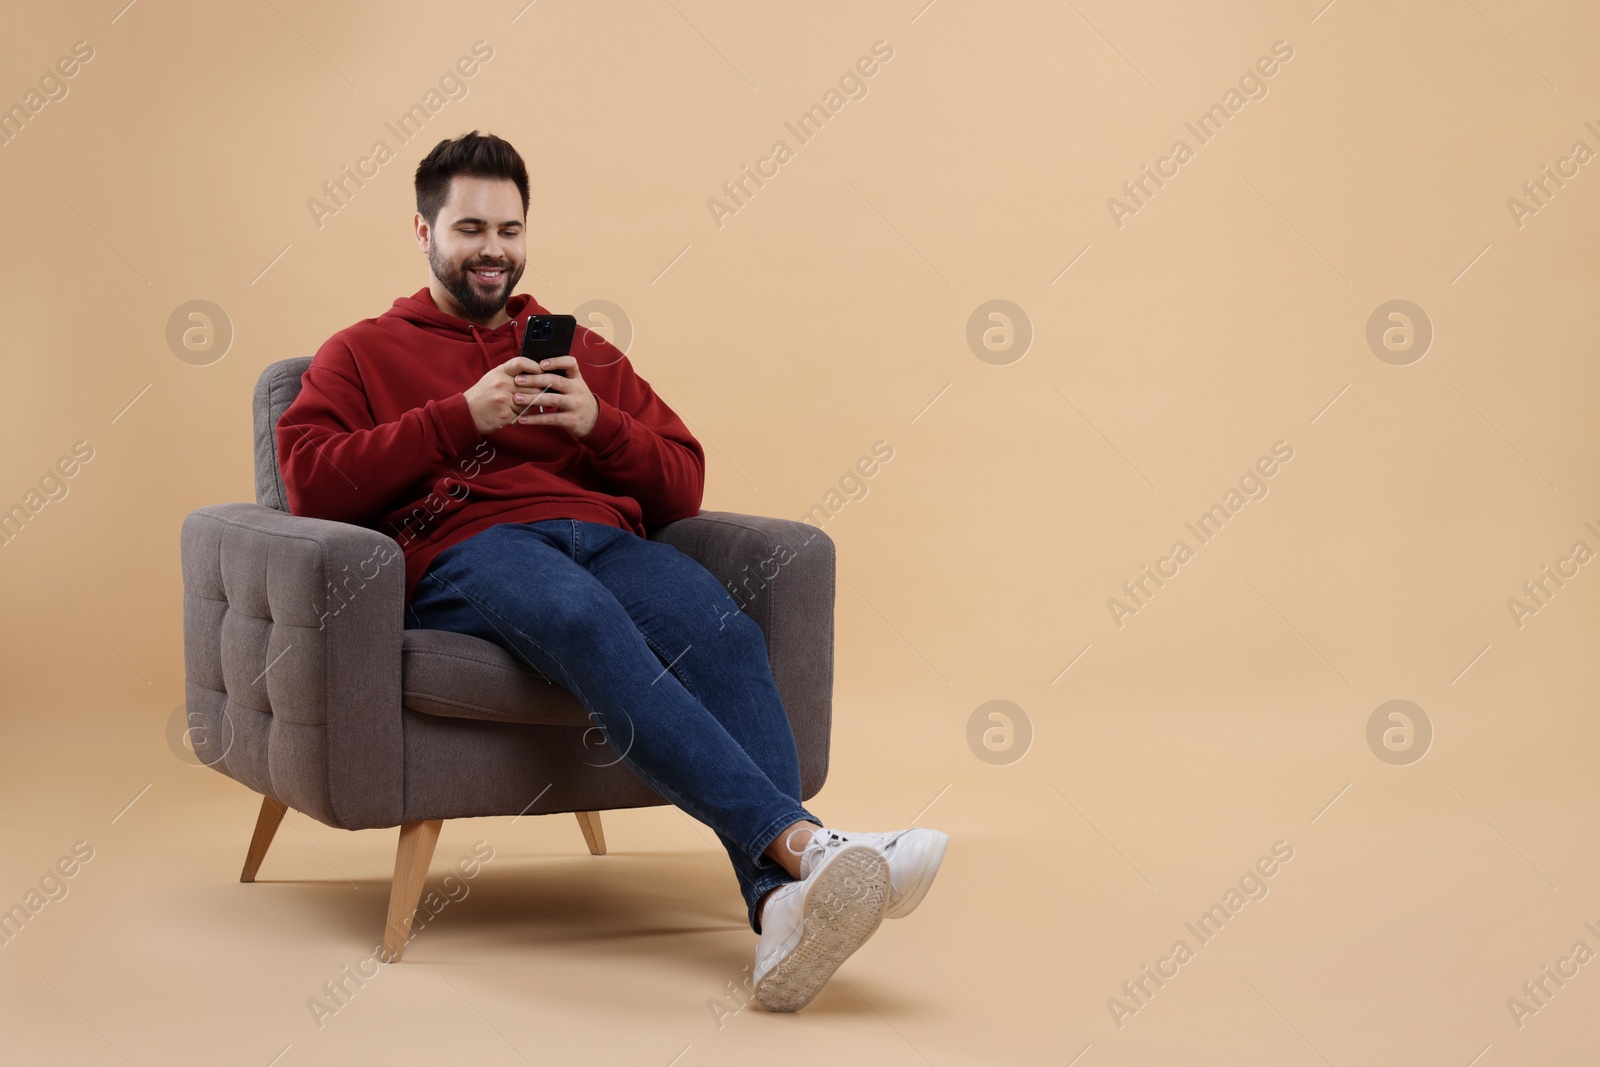 Photo of Happy young man using smartphone on armchair against beige background, space for text